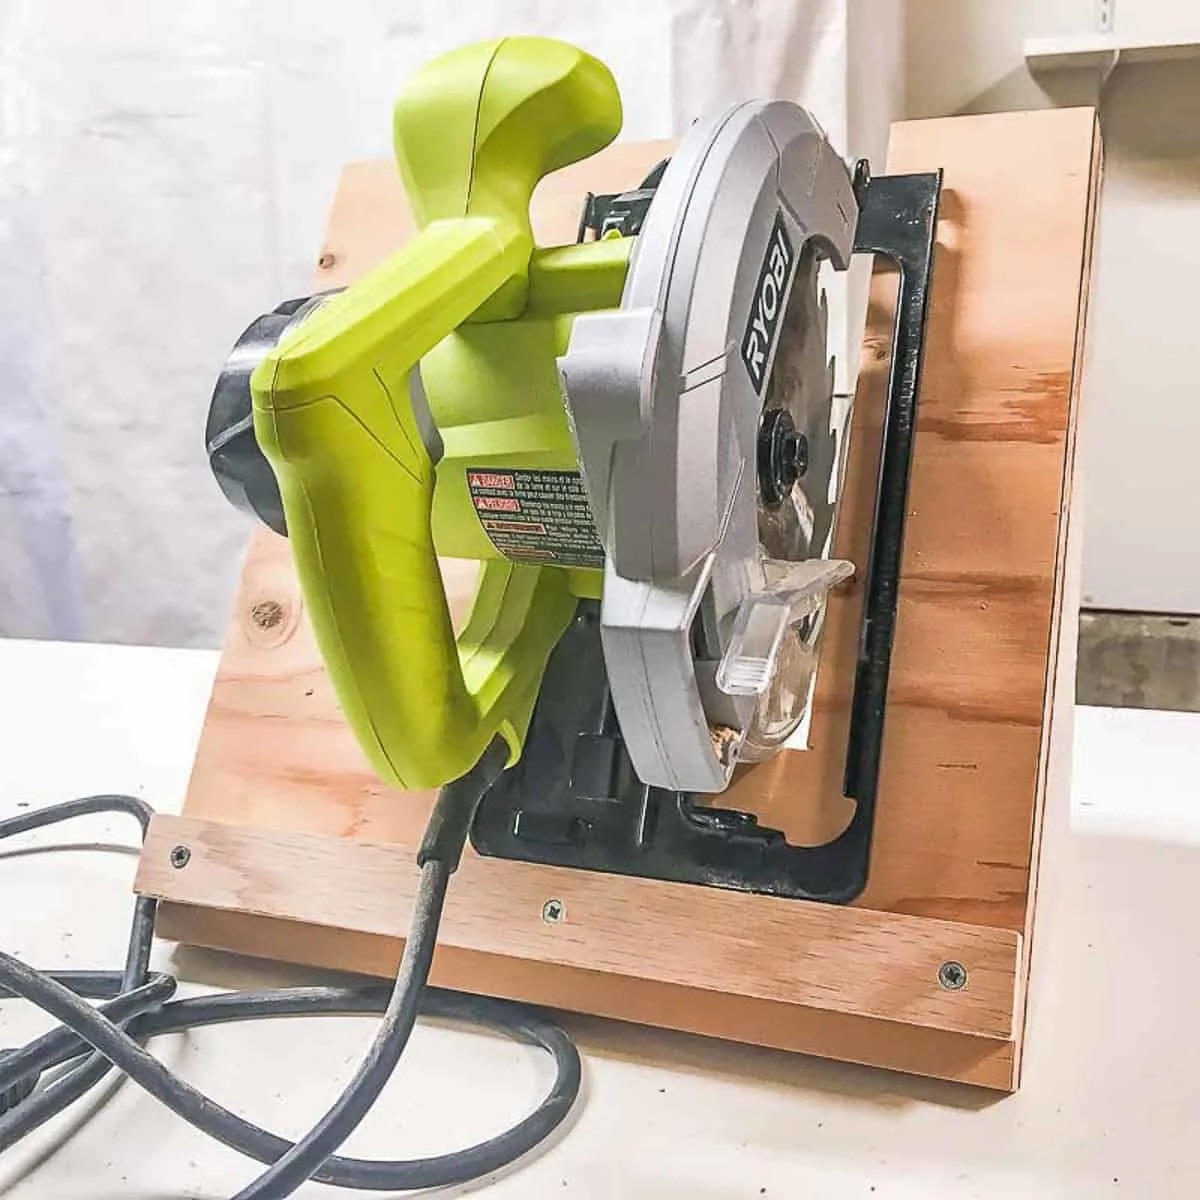 How To Store A Circular Saw